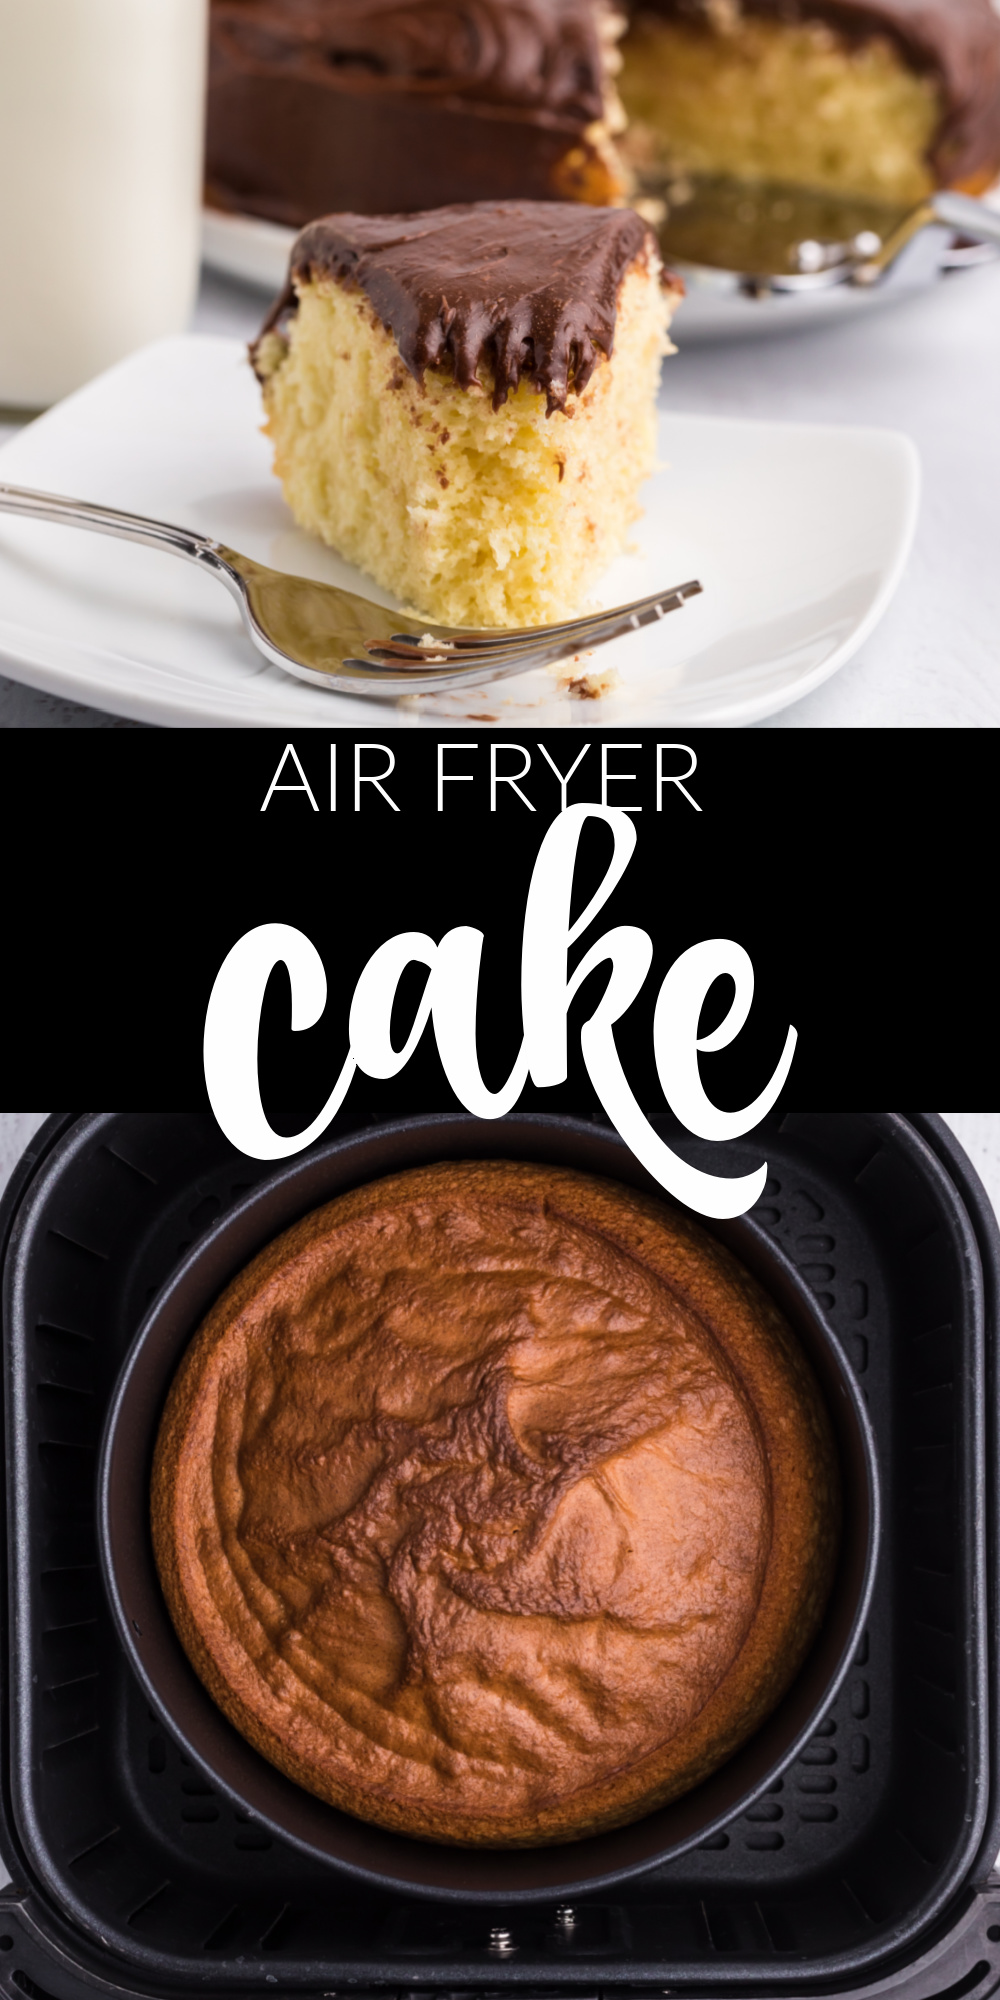 Whether you're making a homemade cake or a boxed cake, making a cake in the Air Fryer is easy and delicious. We're sharing all of our tips and tricks on how to make the best Air Fryer Cake that everyone will love.